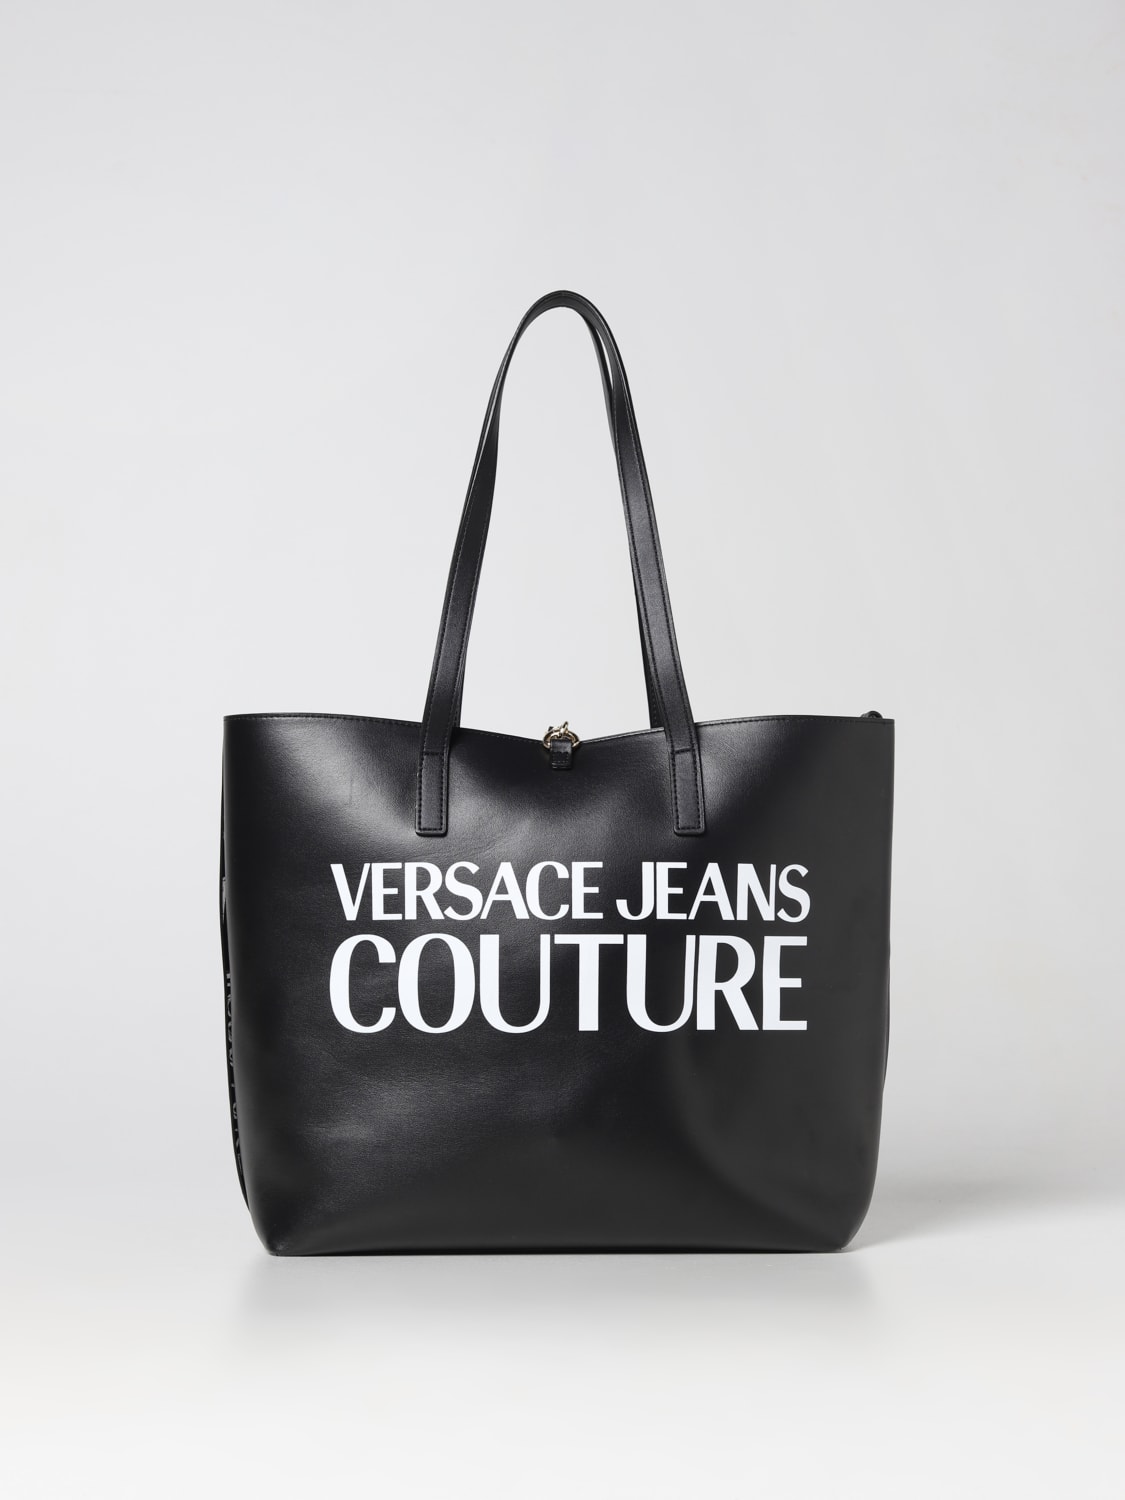 VERSACE JEANS COUTURE トートバッグ ブラック - トートバッグ